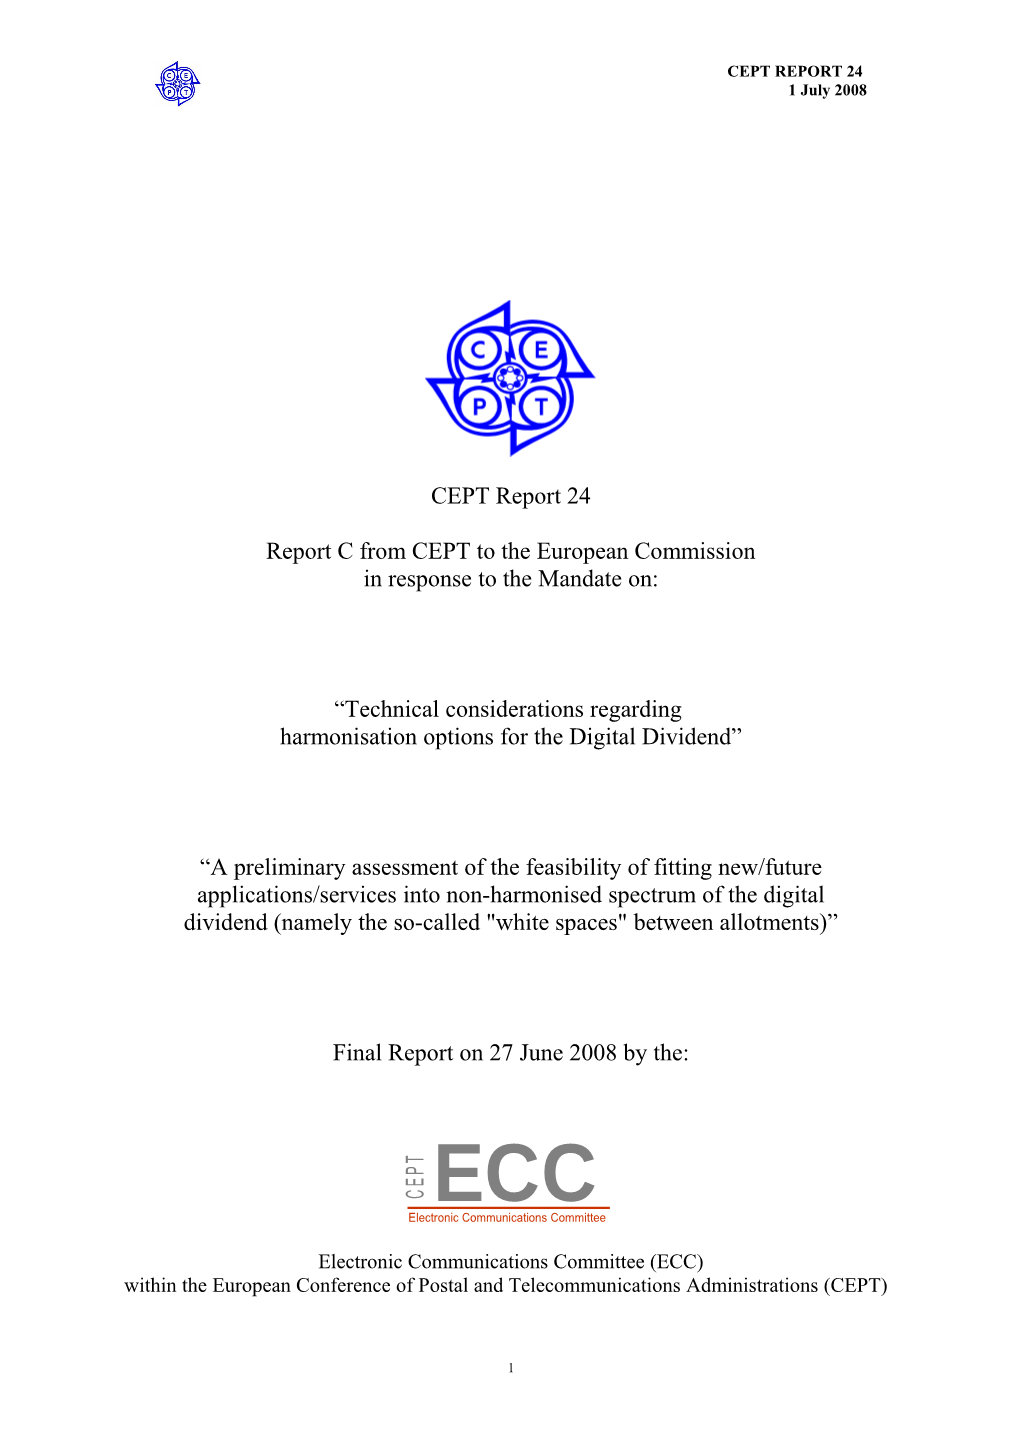 Report C from CEPT to the European Commission